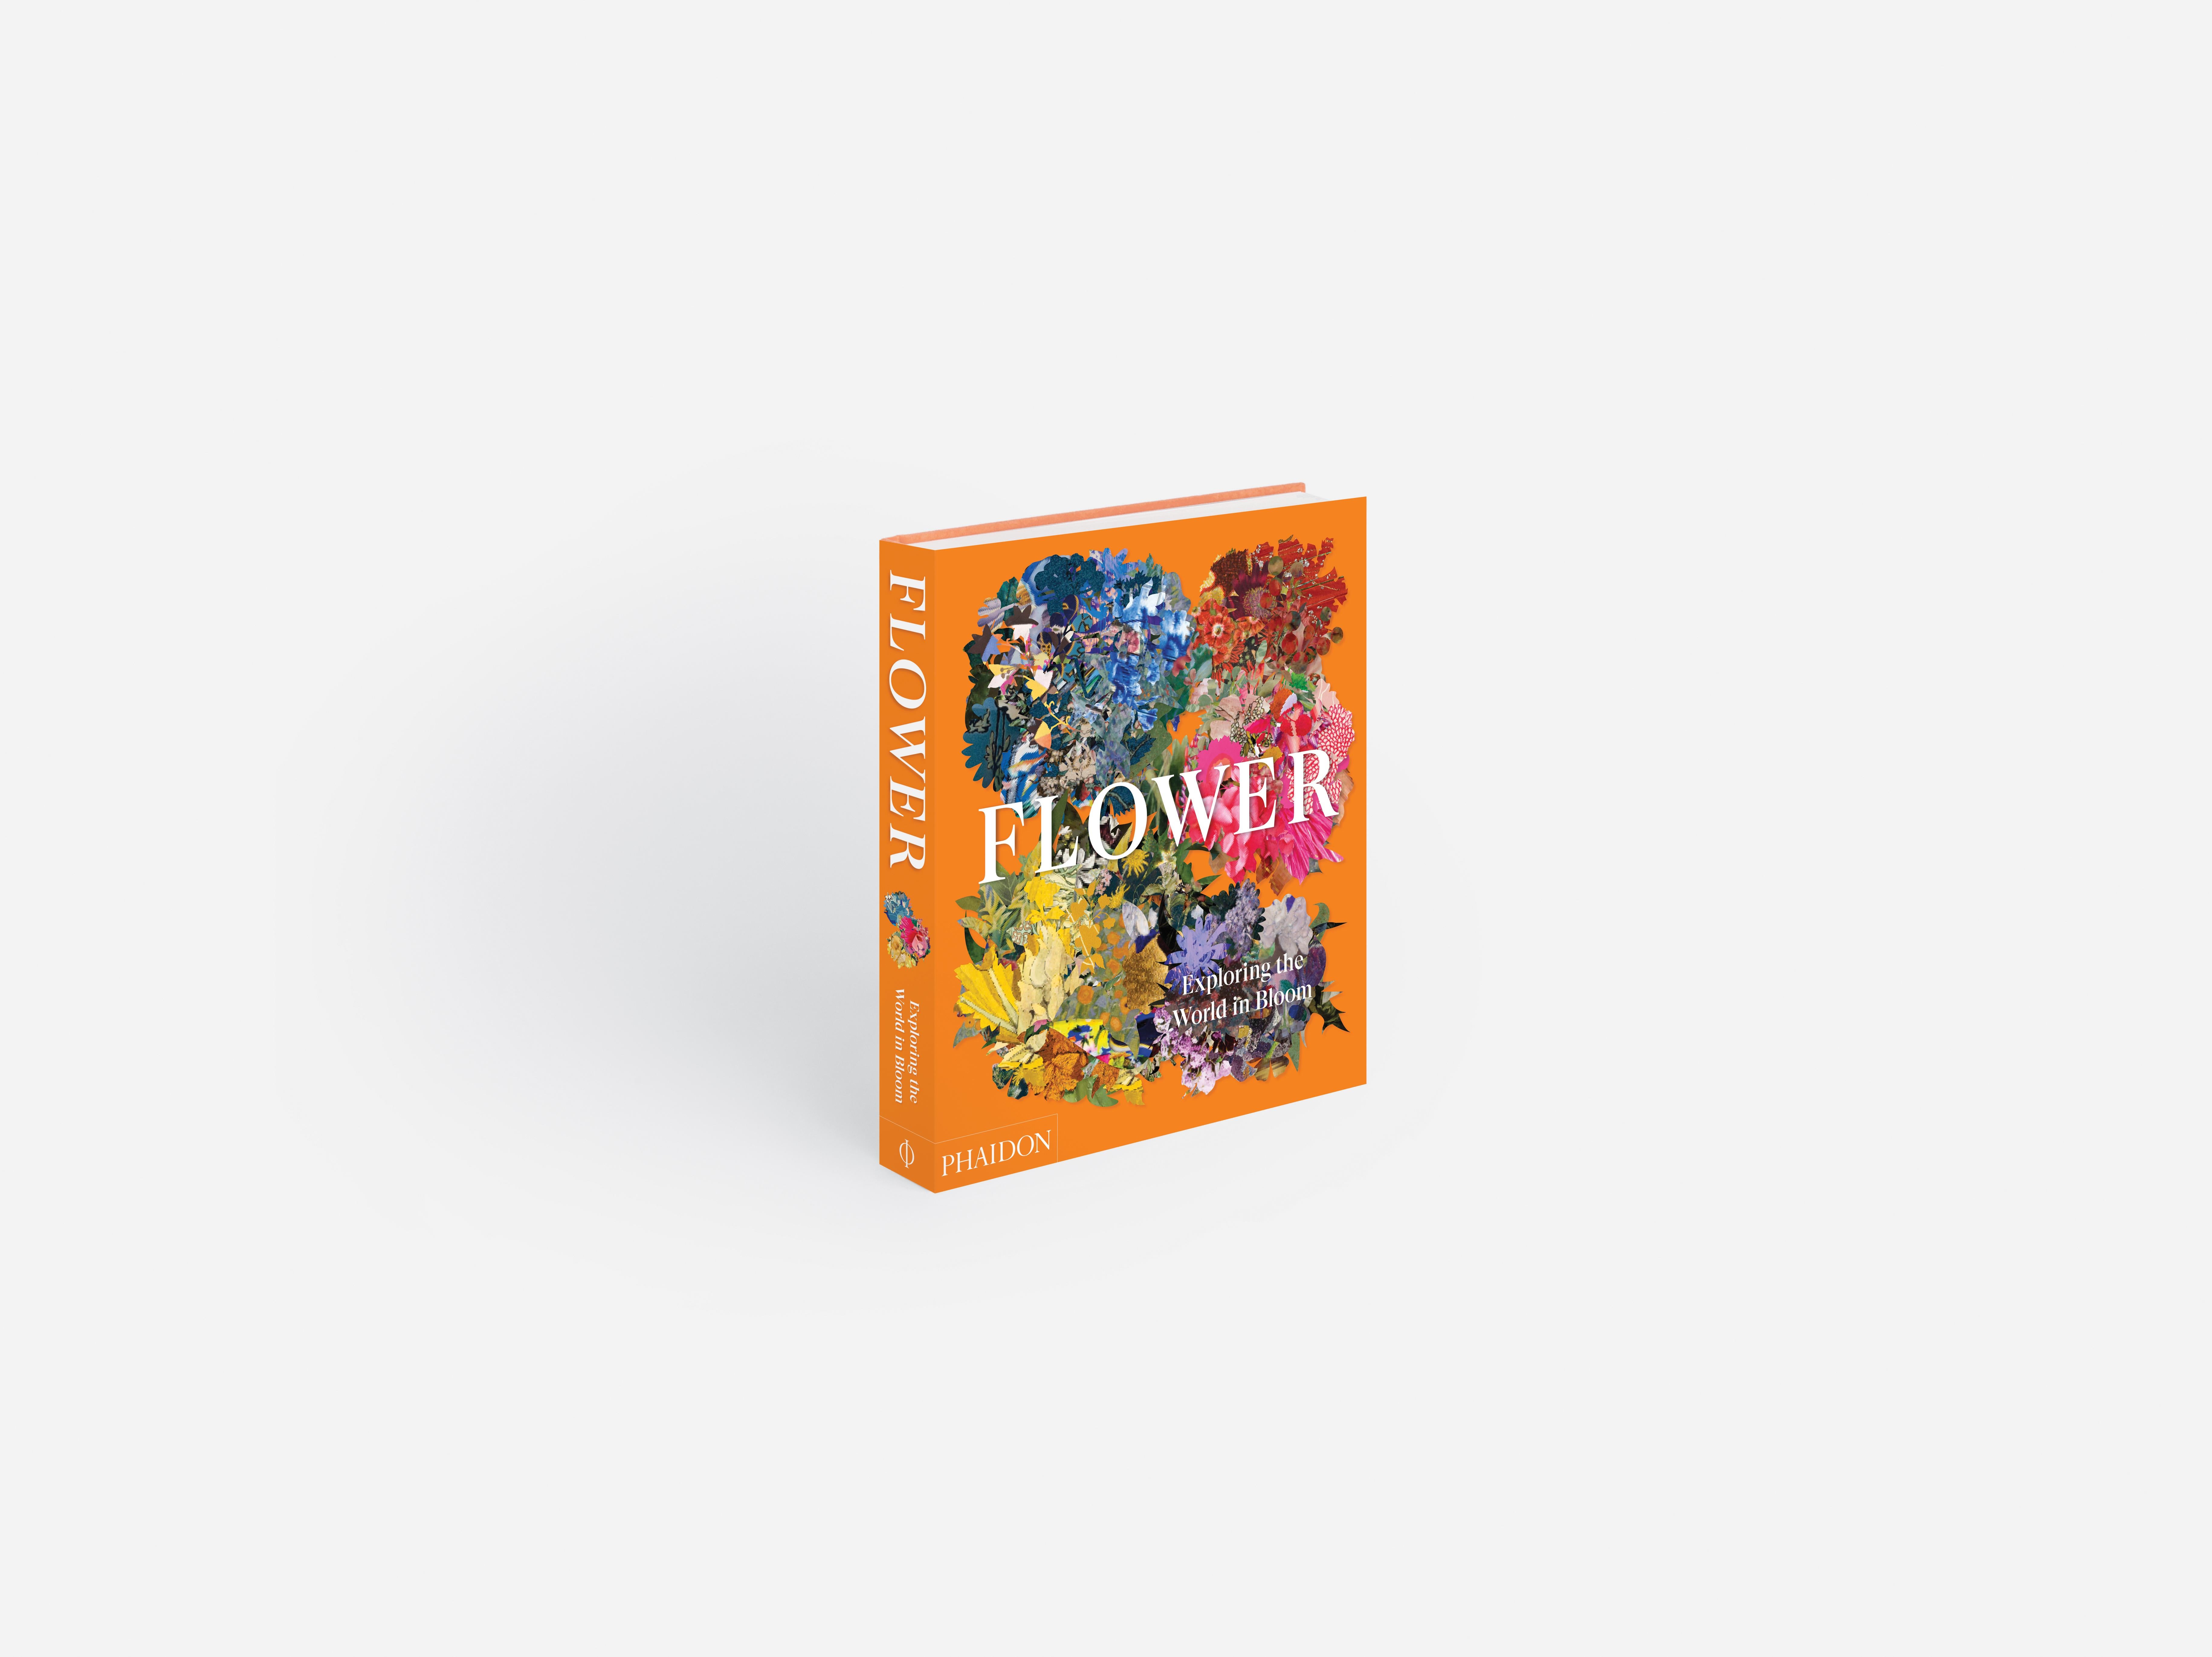 A comprehensive and sumptuous survey that celebrates the beauty and appeal of flowers throughout art, history, and culture

The latest installment in the bestselling Explorer Series takes readers on a journey across continents and cultures to